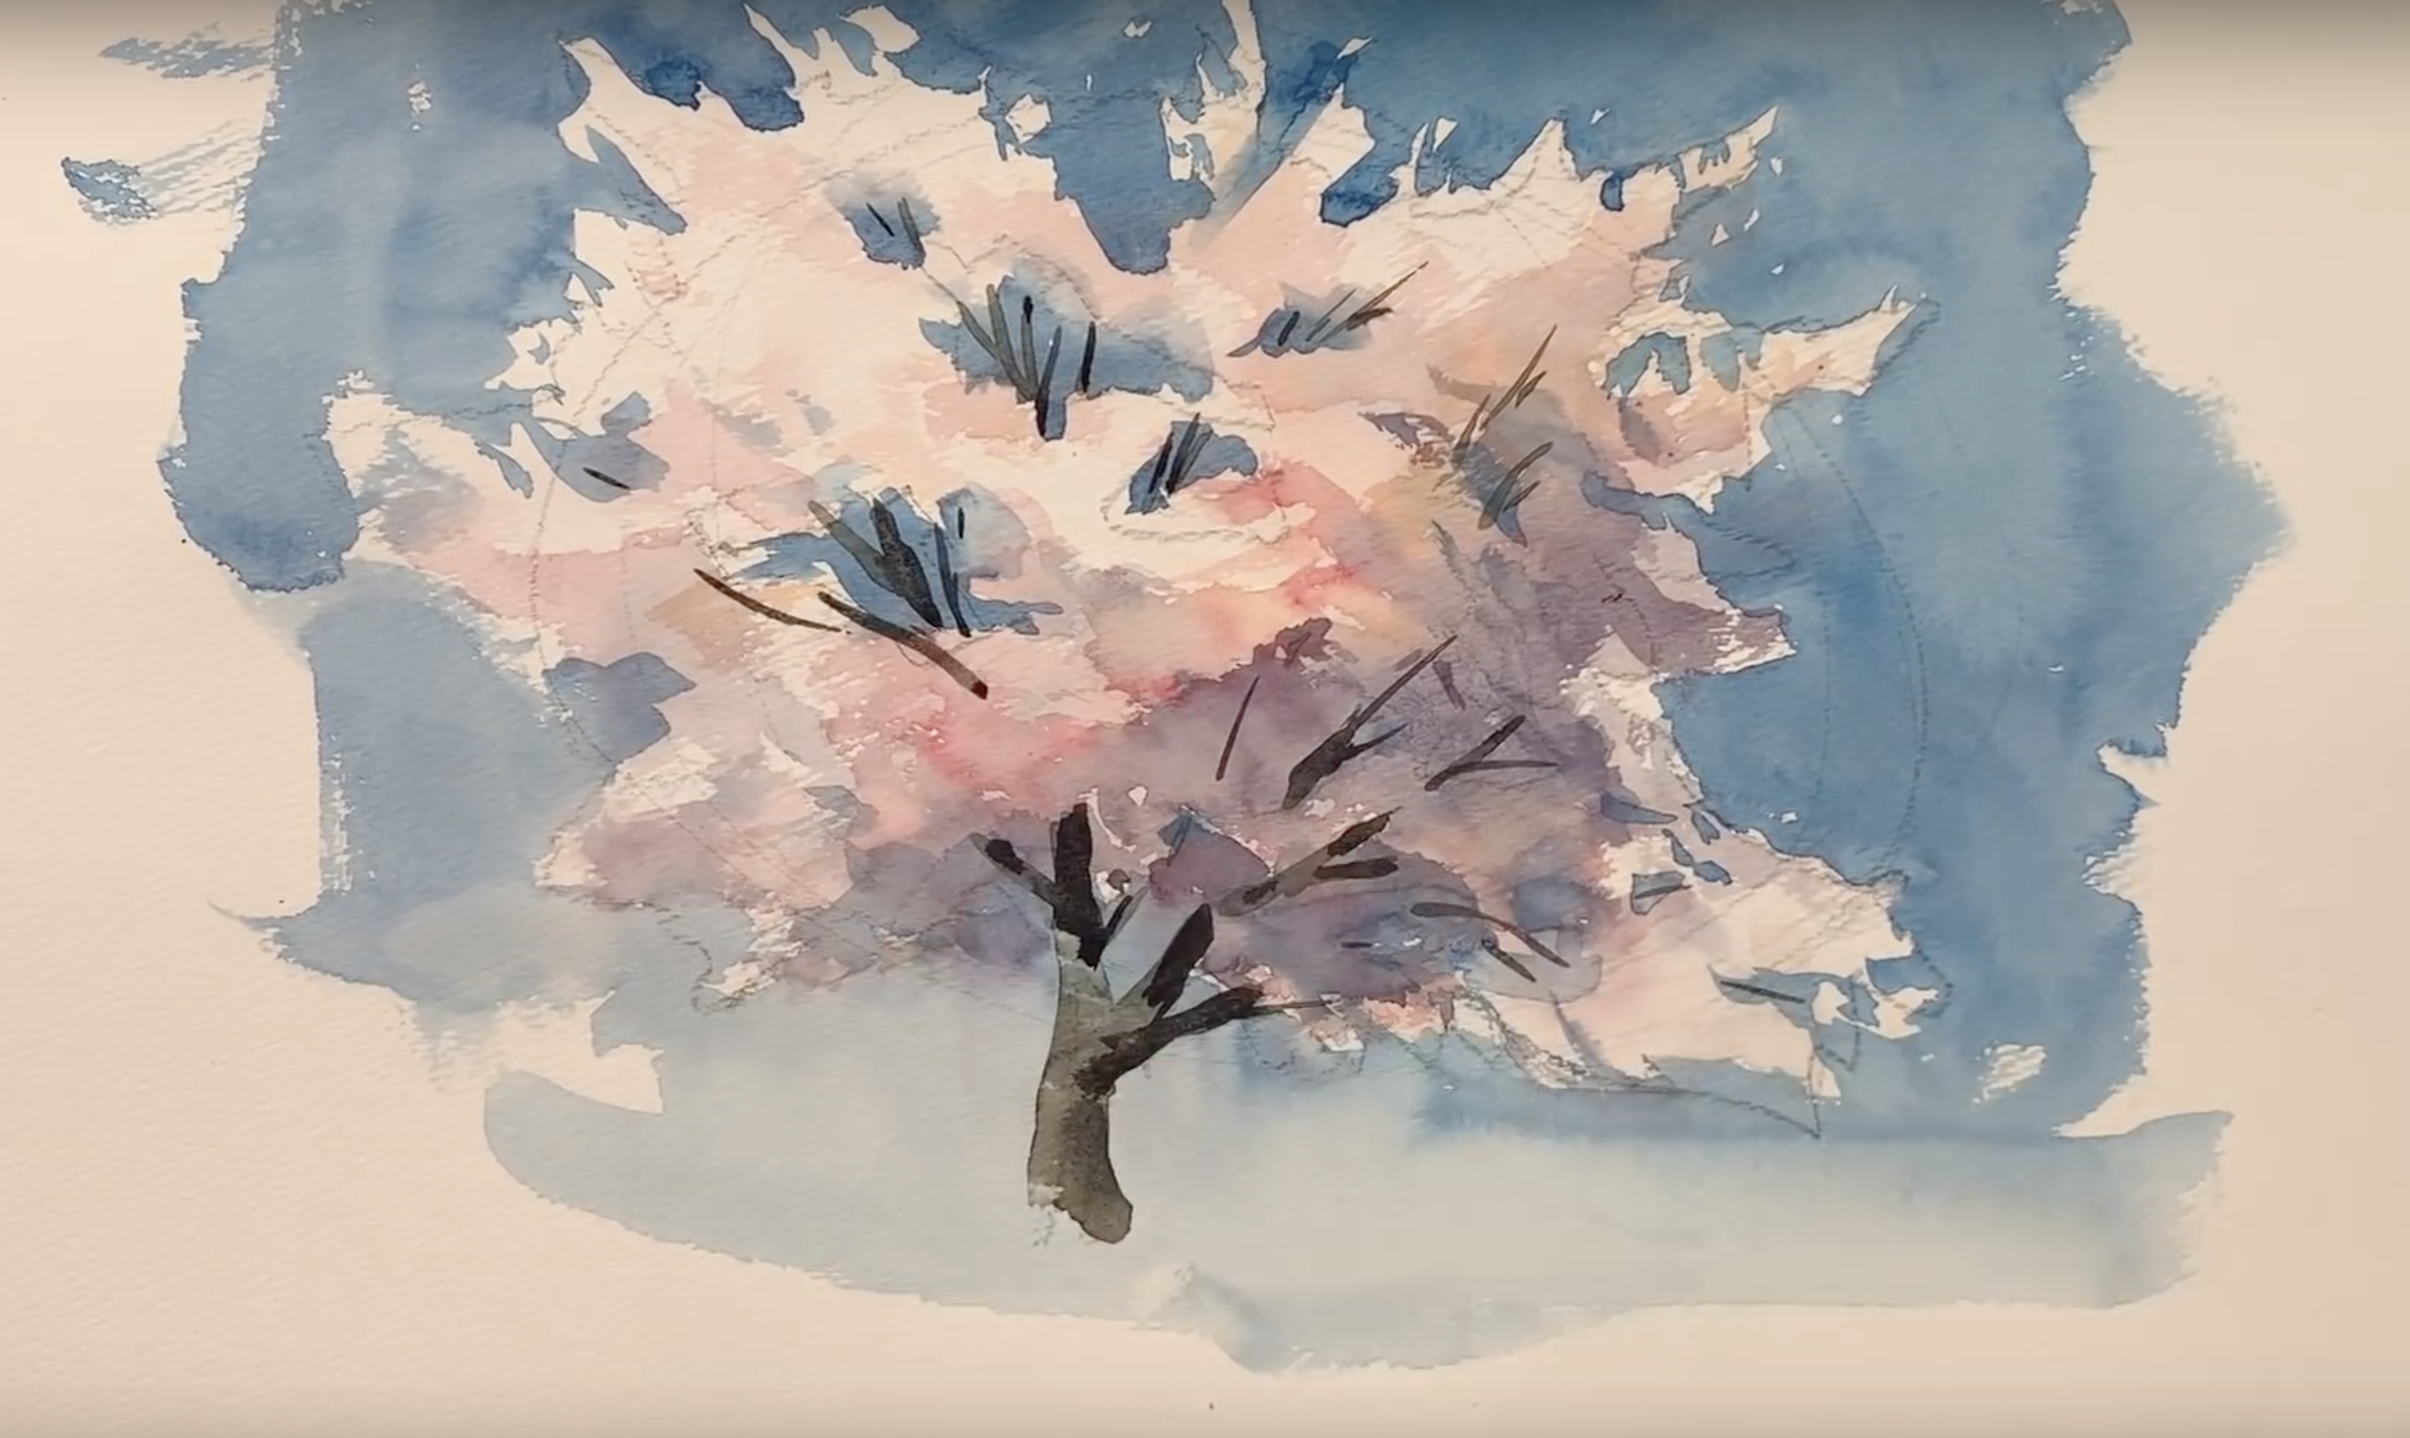 easy-watercolor-techniques-painting-japanese-flowers-within-5-minutes - STEP 7_revised